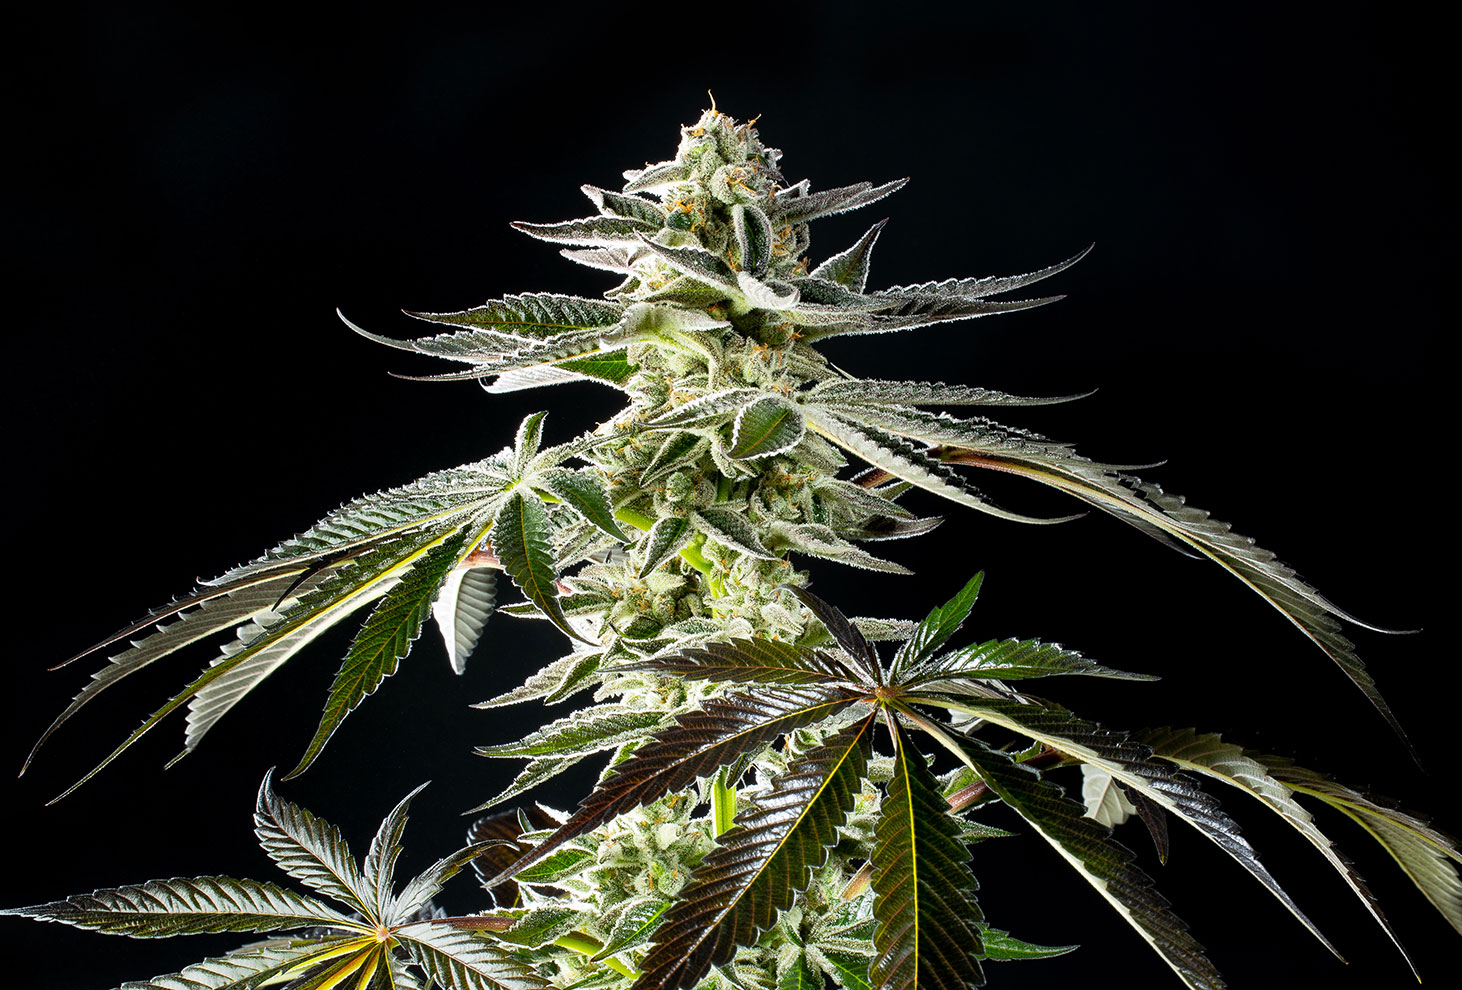 What’s the pre-flowering stage of cannabis? When, why and how